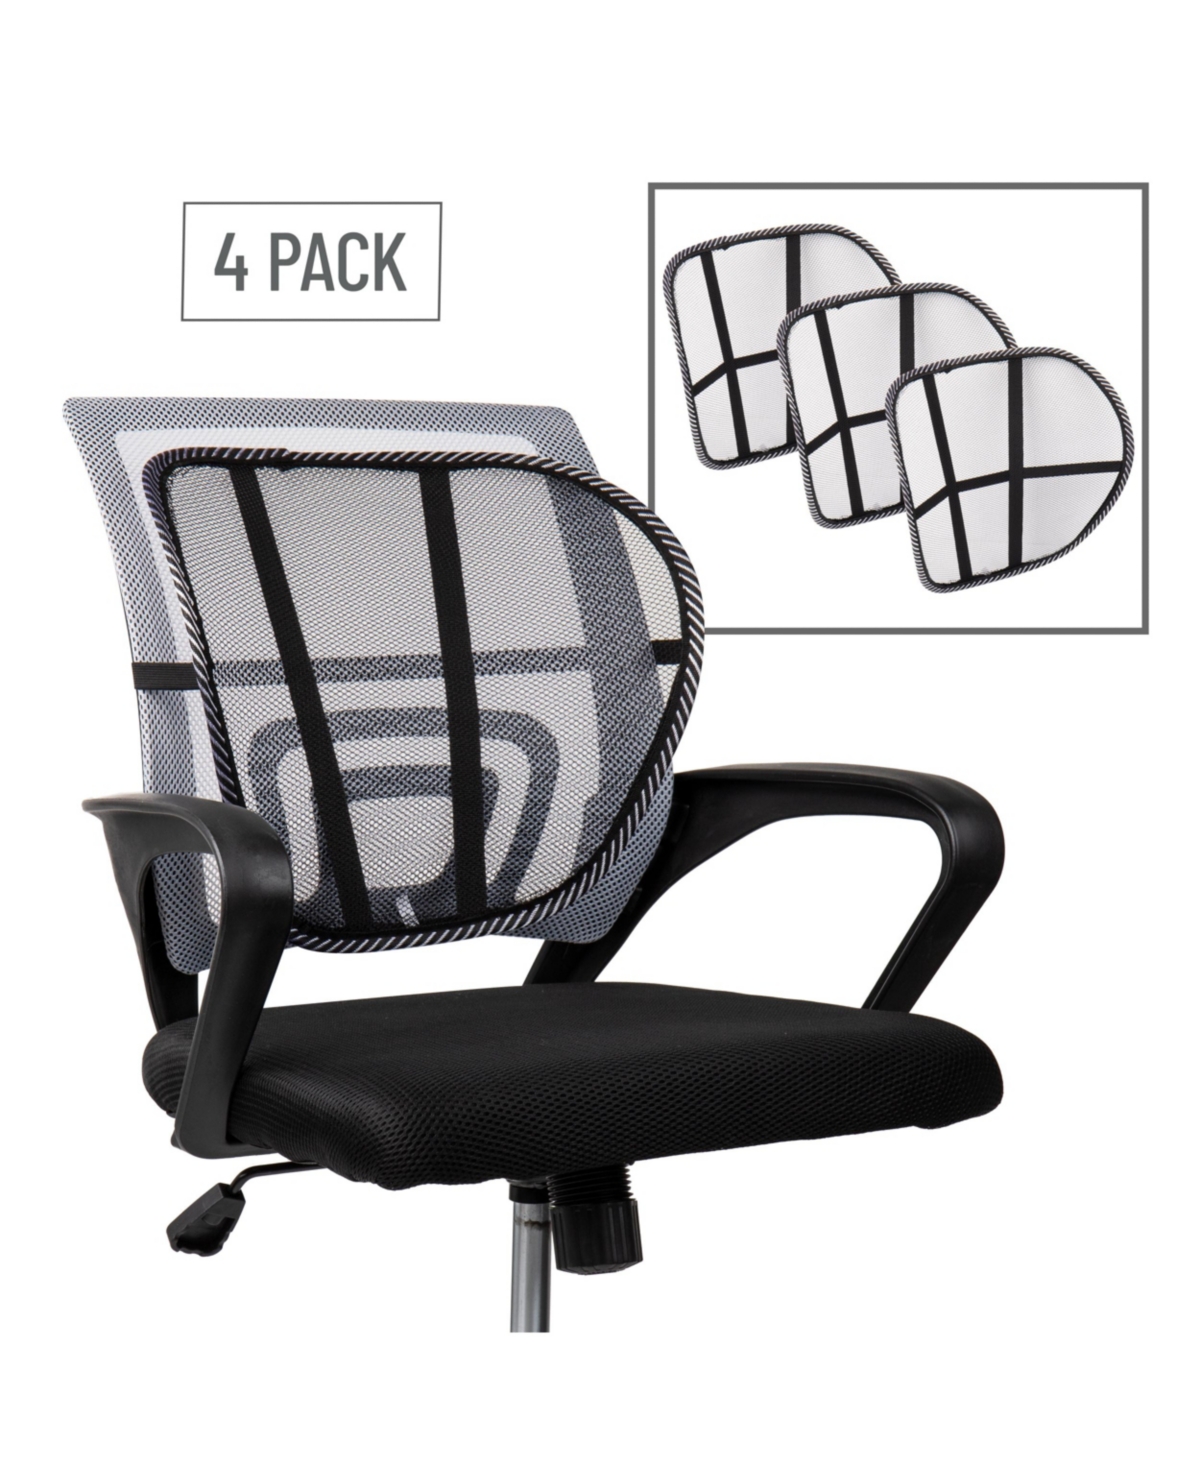 Shop Mind Reader Harmony Collection, Ergonomic Lower Back Support, Attaches To Office Chair, Mesh, Lower Back Pressur In Black